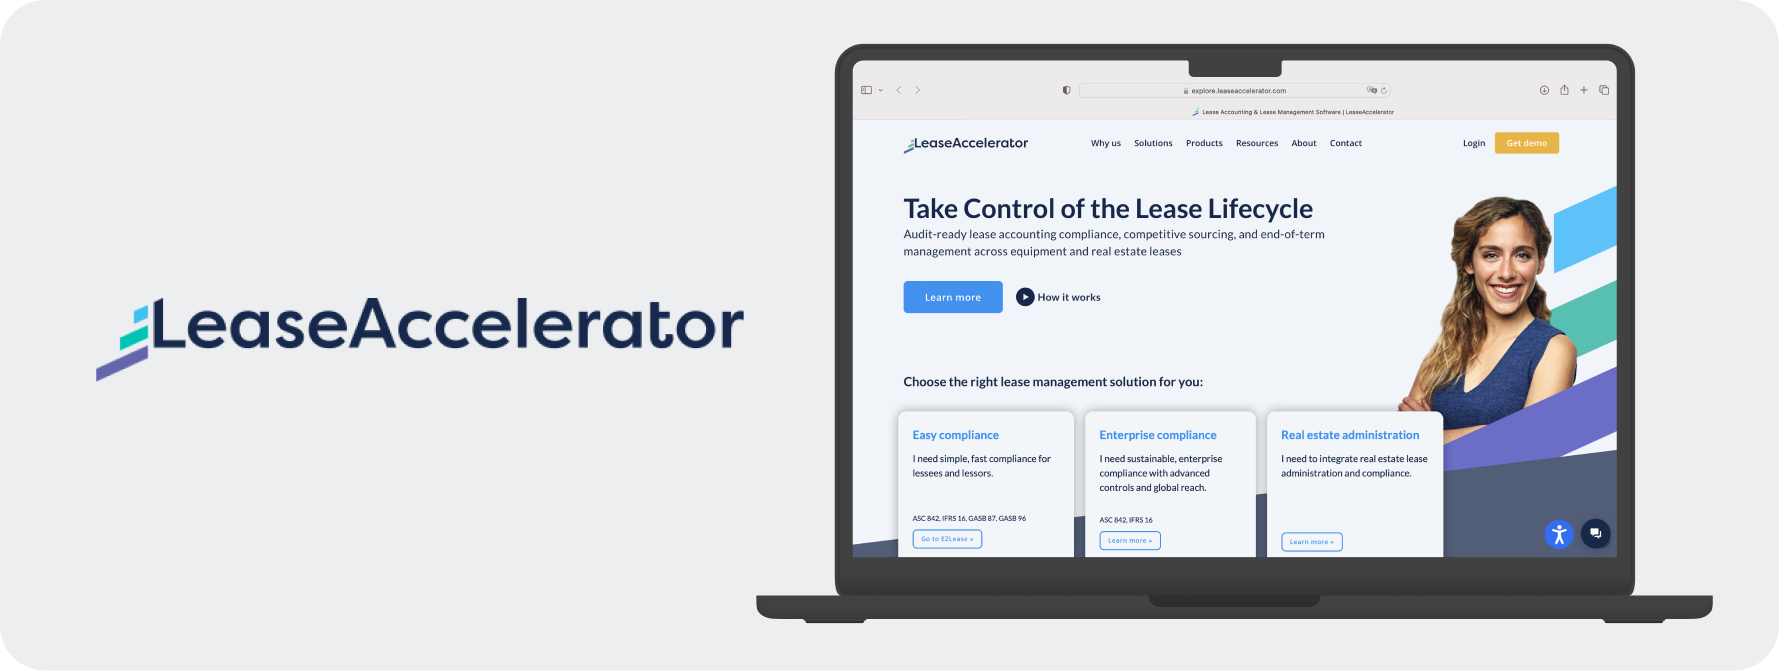 Lease Accelerator commercial real estate proptech